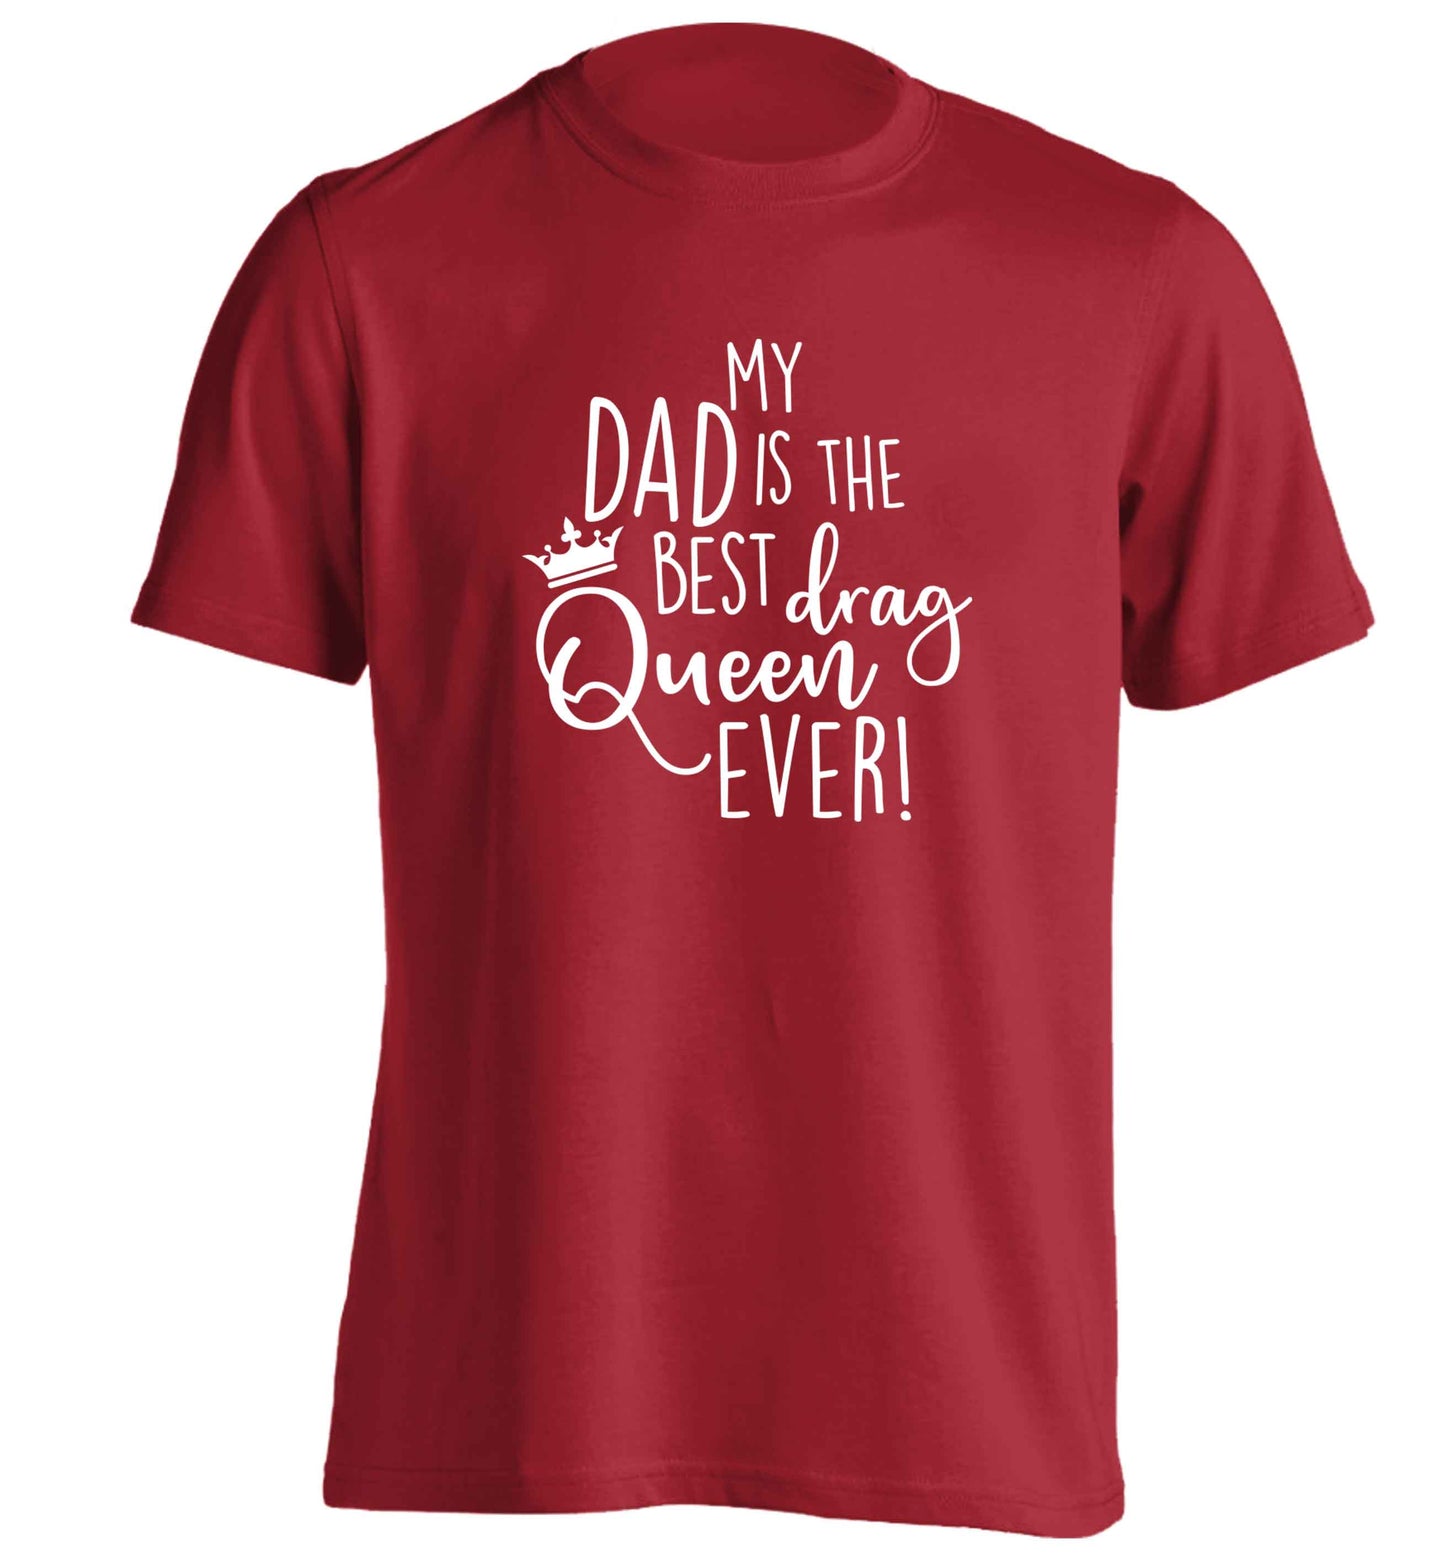 My dad is the best drag Queen ever adults unisex red Tshirt 2XL